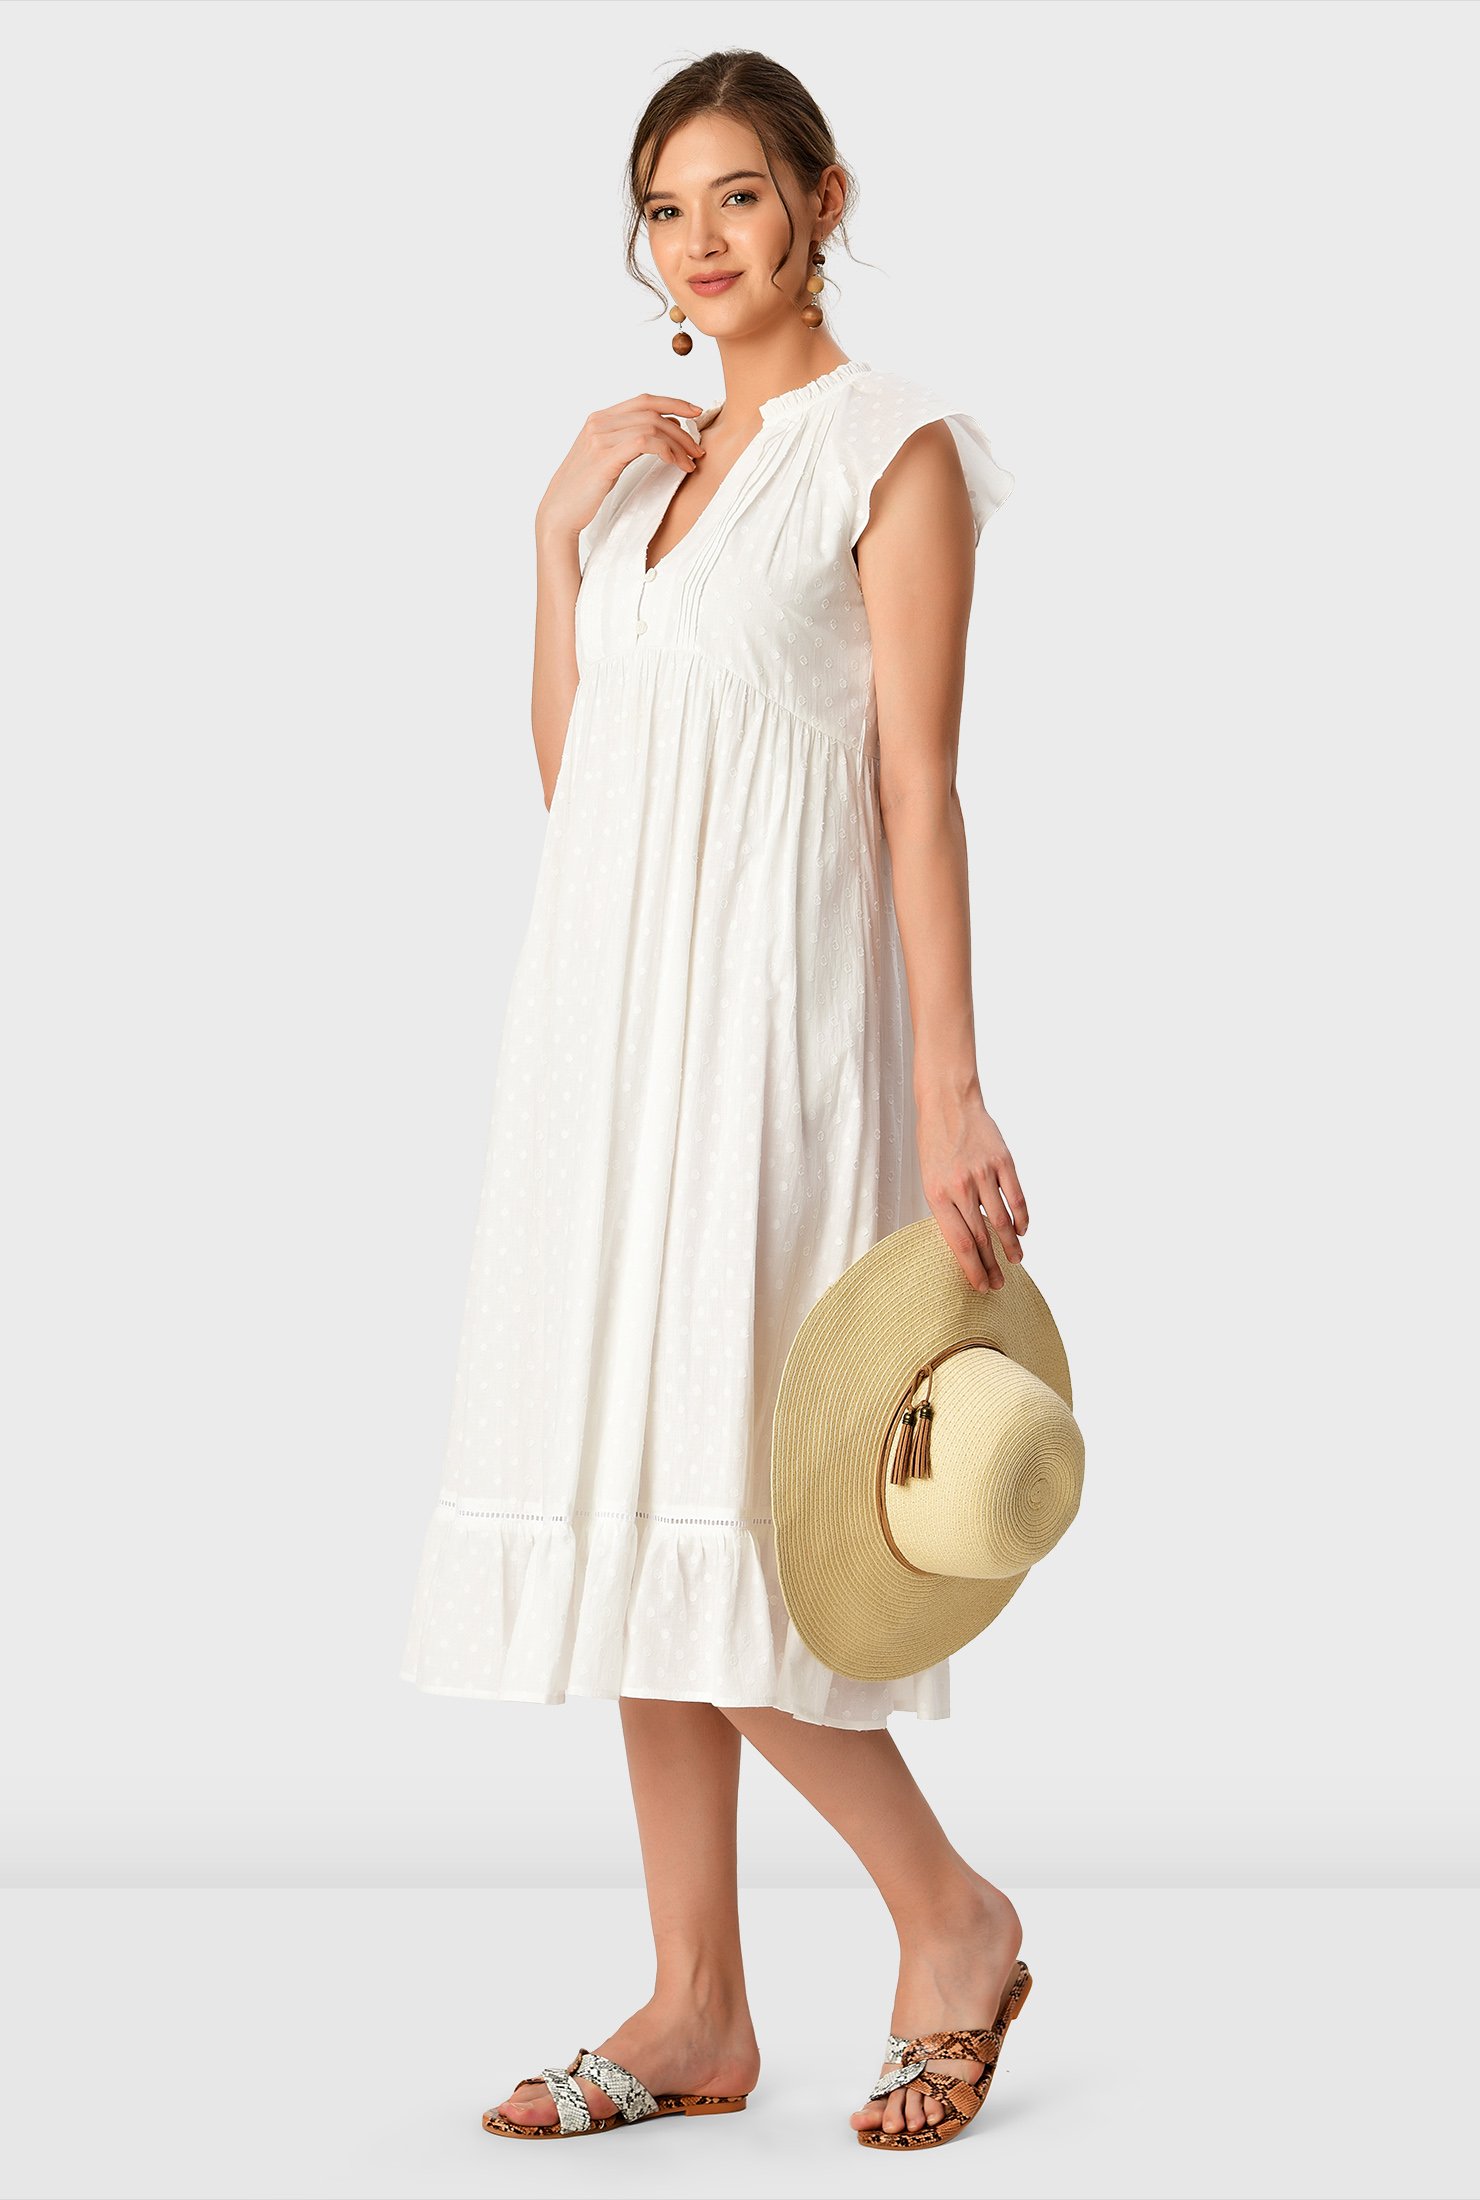 The perfect summer dress, our weightless white crafted from swiss dot cotton voile with a short rouleau-button front and relaxed empire waist floats down to a ruffle flounce hem.